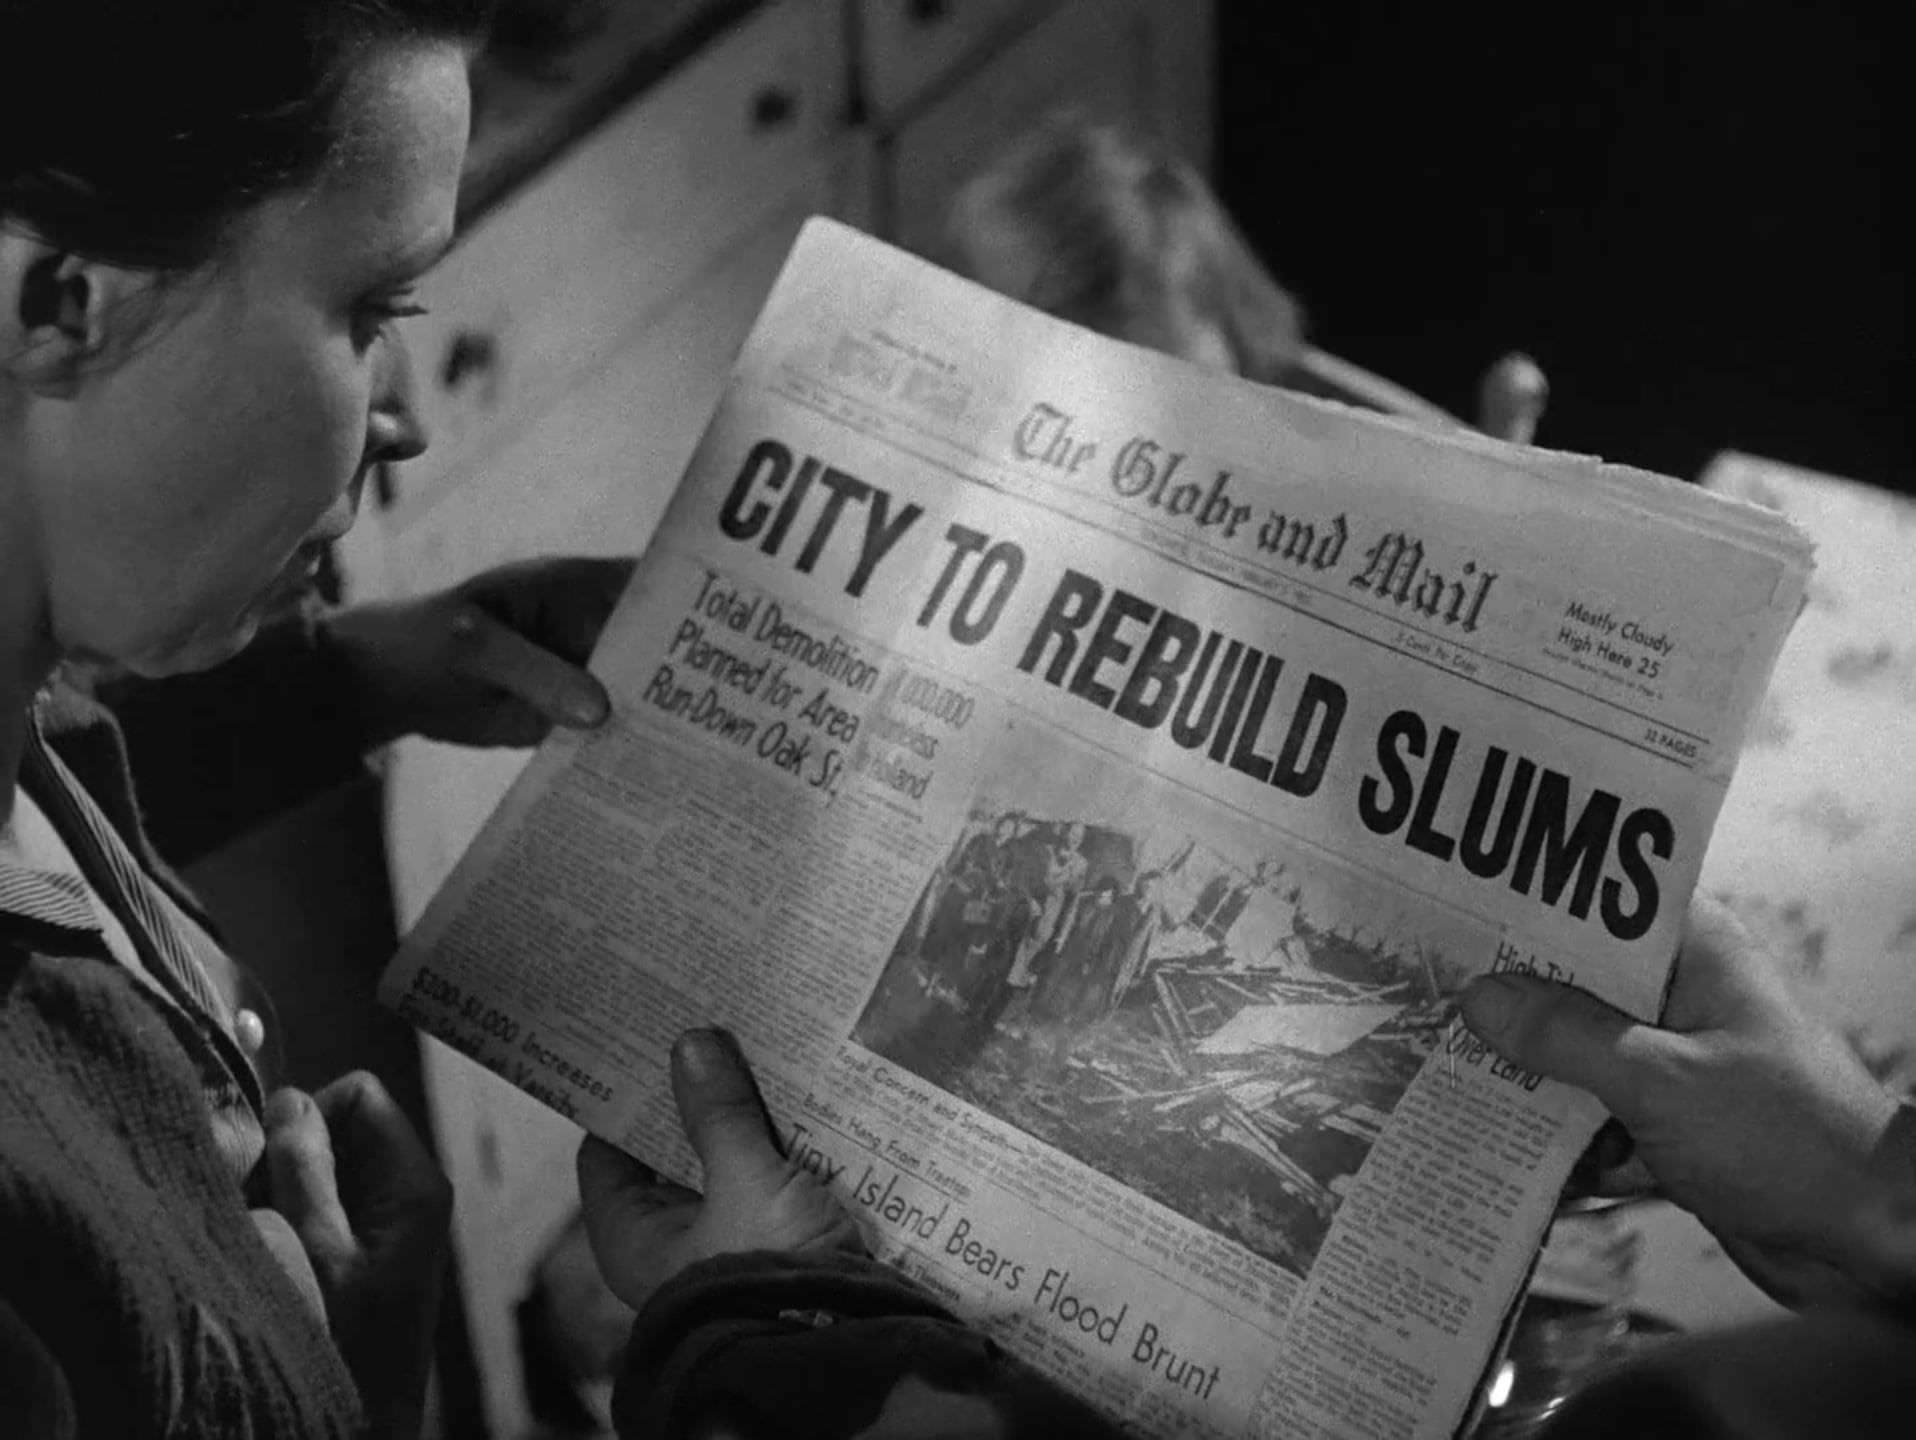 "City To Rebuild Slums" - A still from 'Farewell Oak Street', the 1953